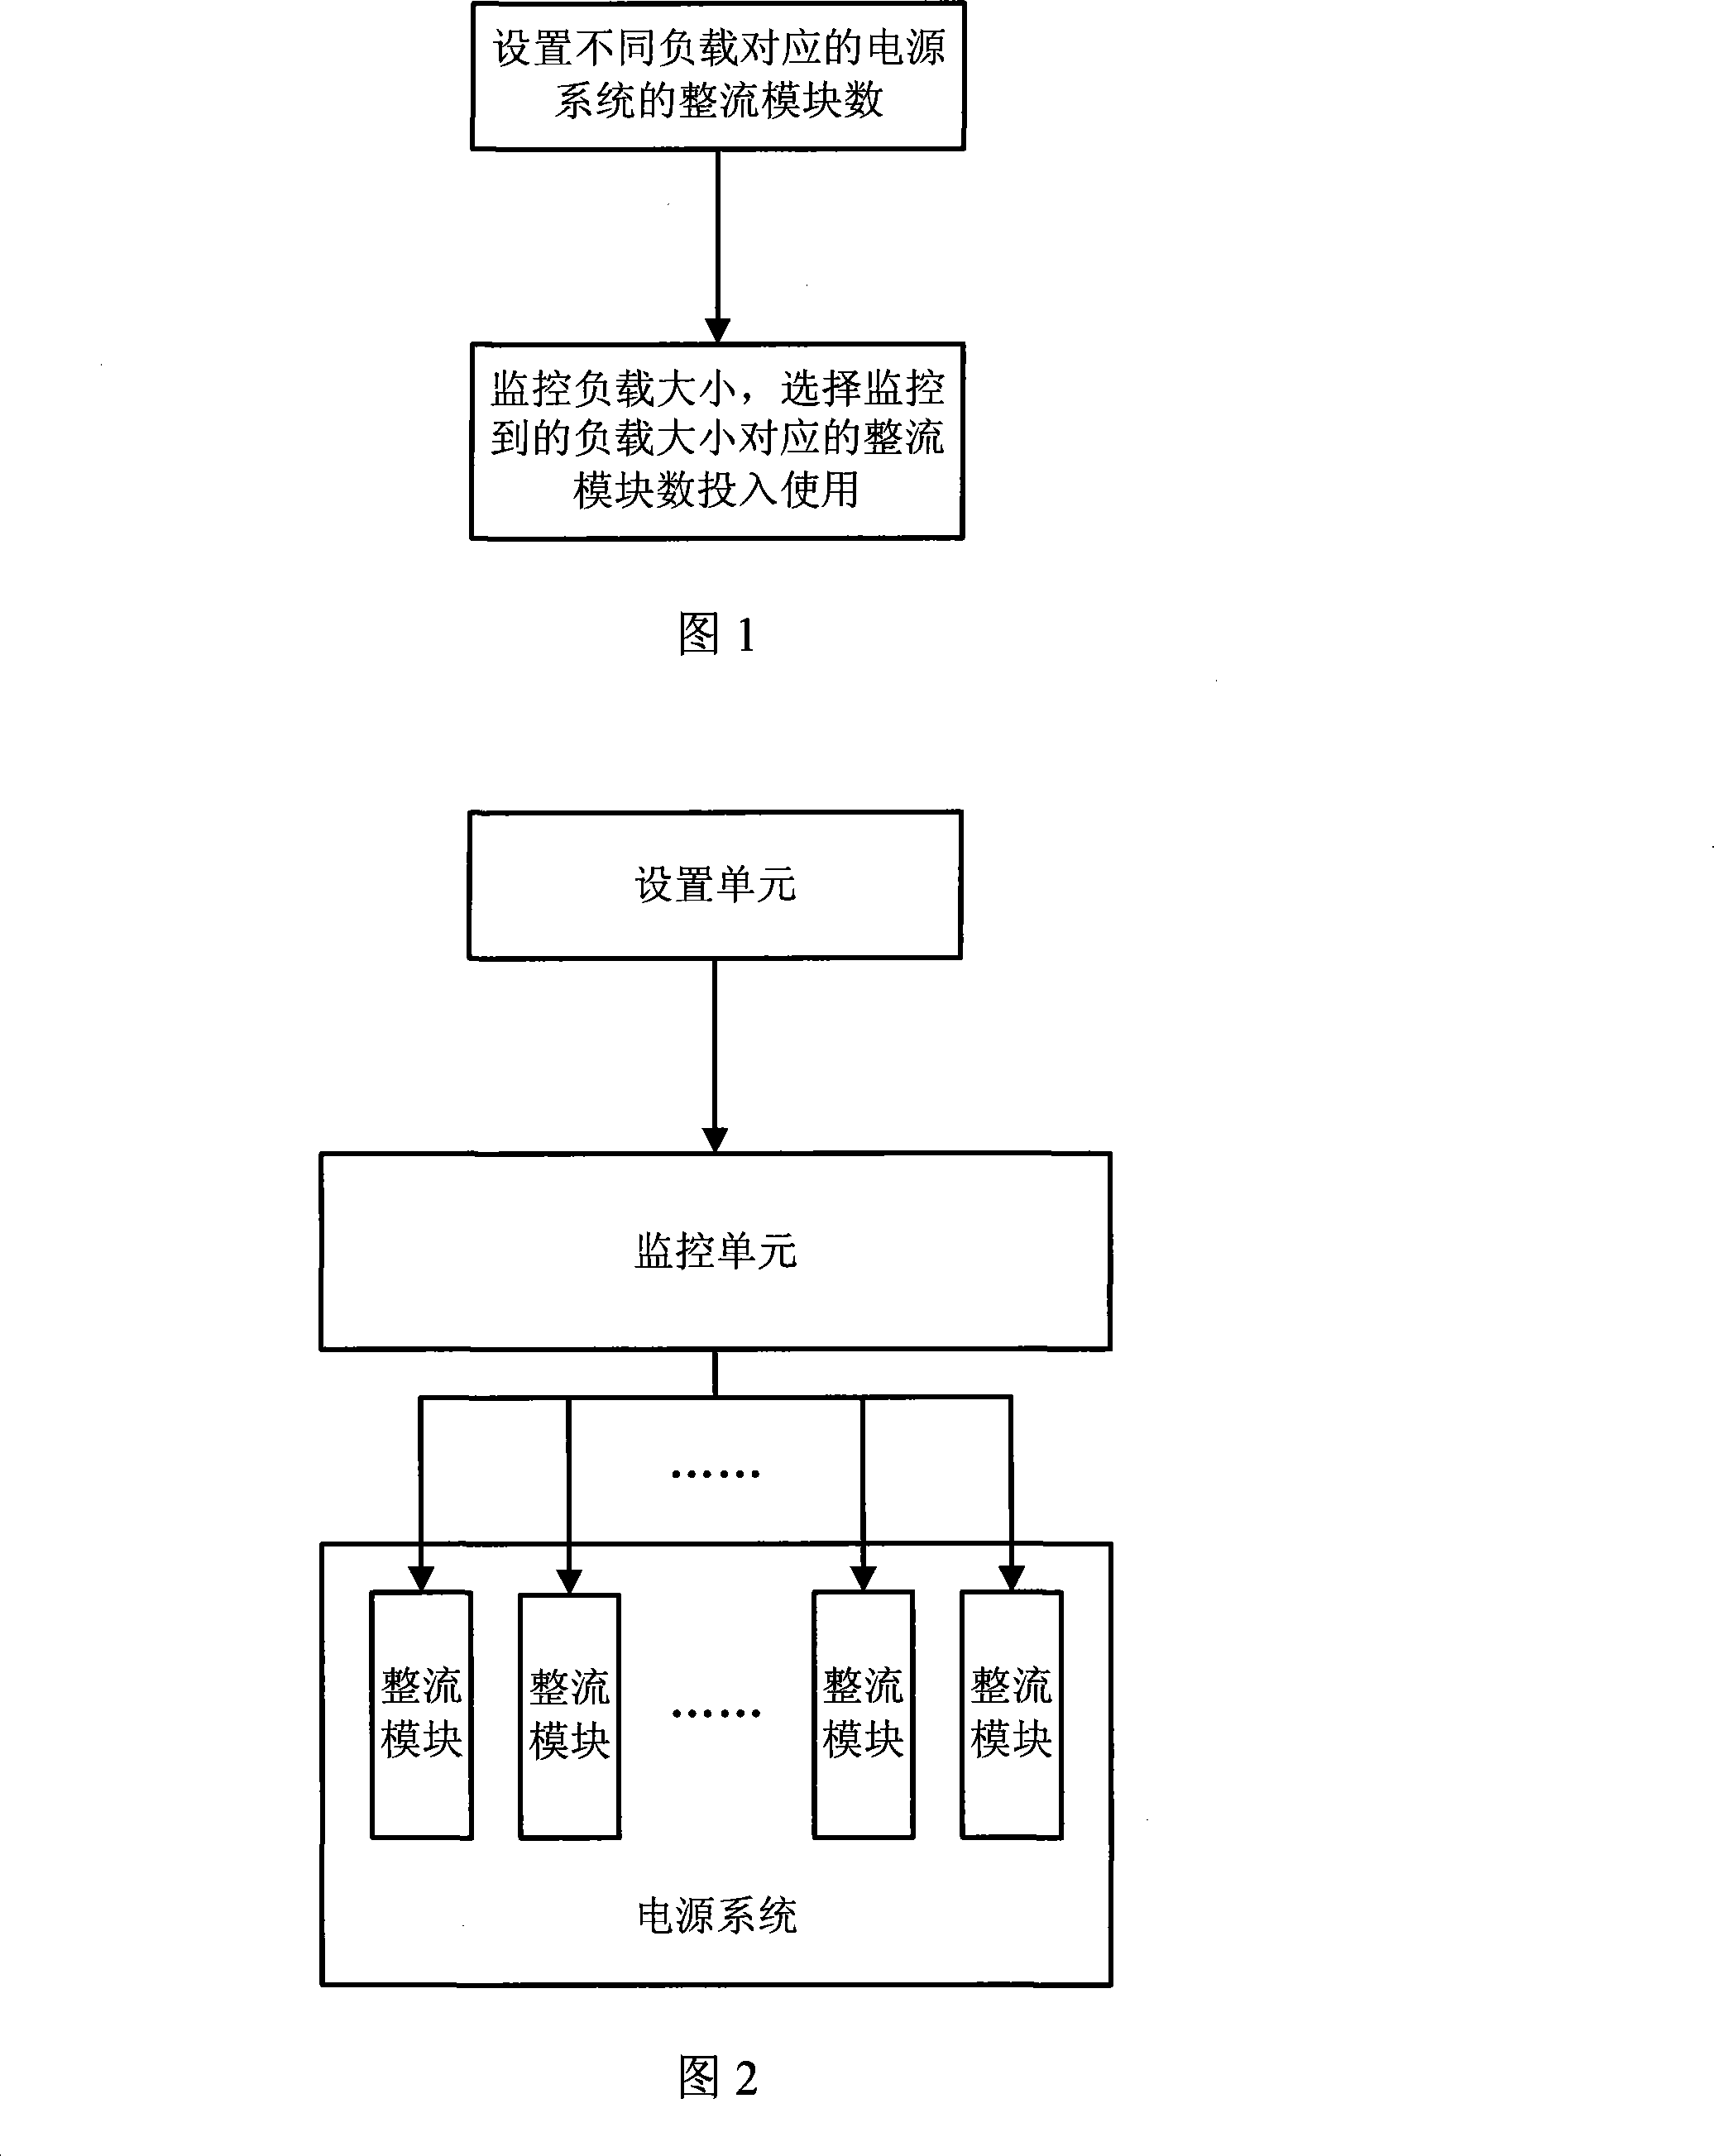 Electric power system energy-saving control method and apparatus